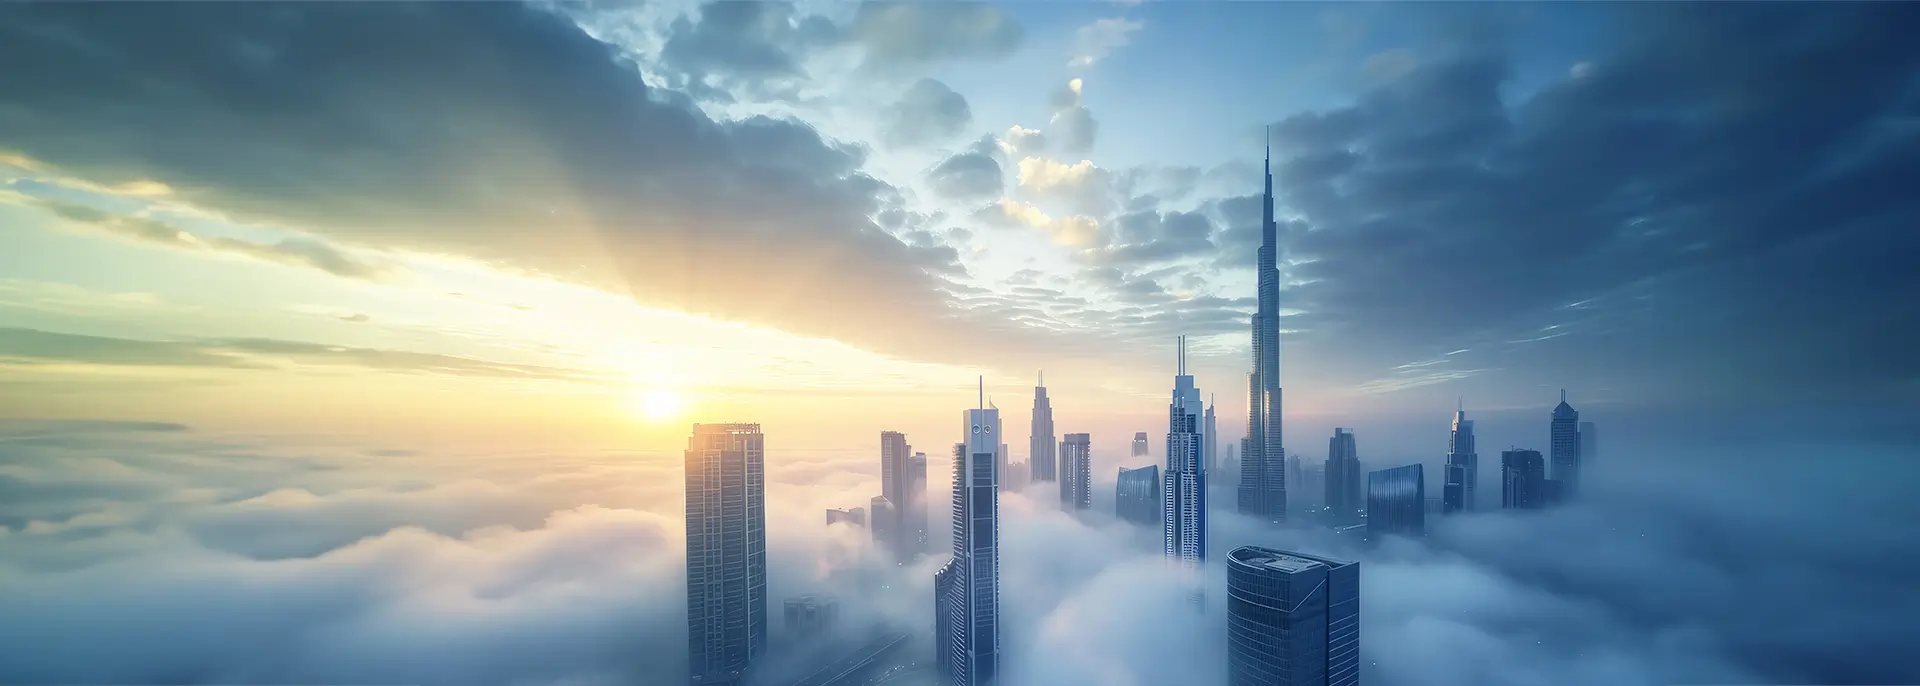 Downtown Dubai with skyscrapers submerged in think fog